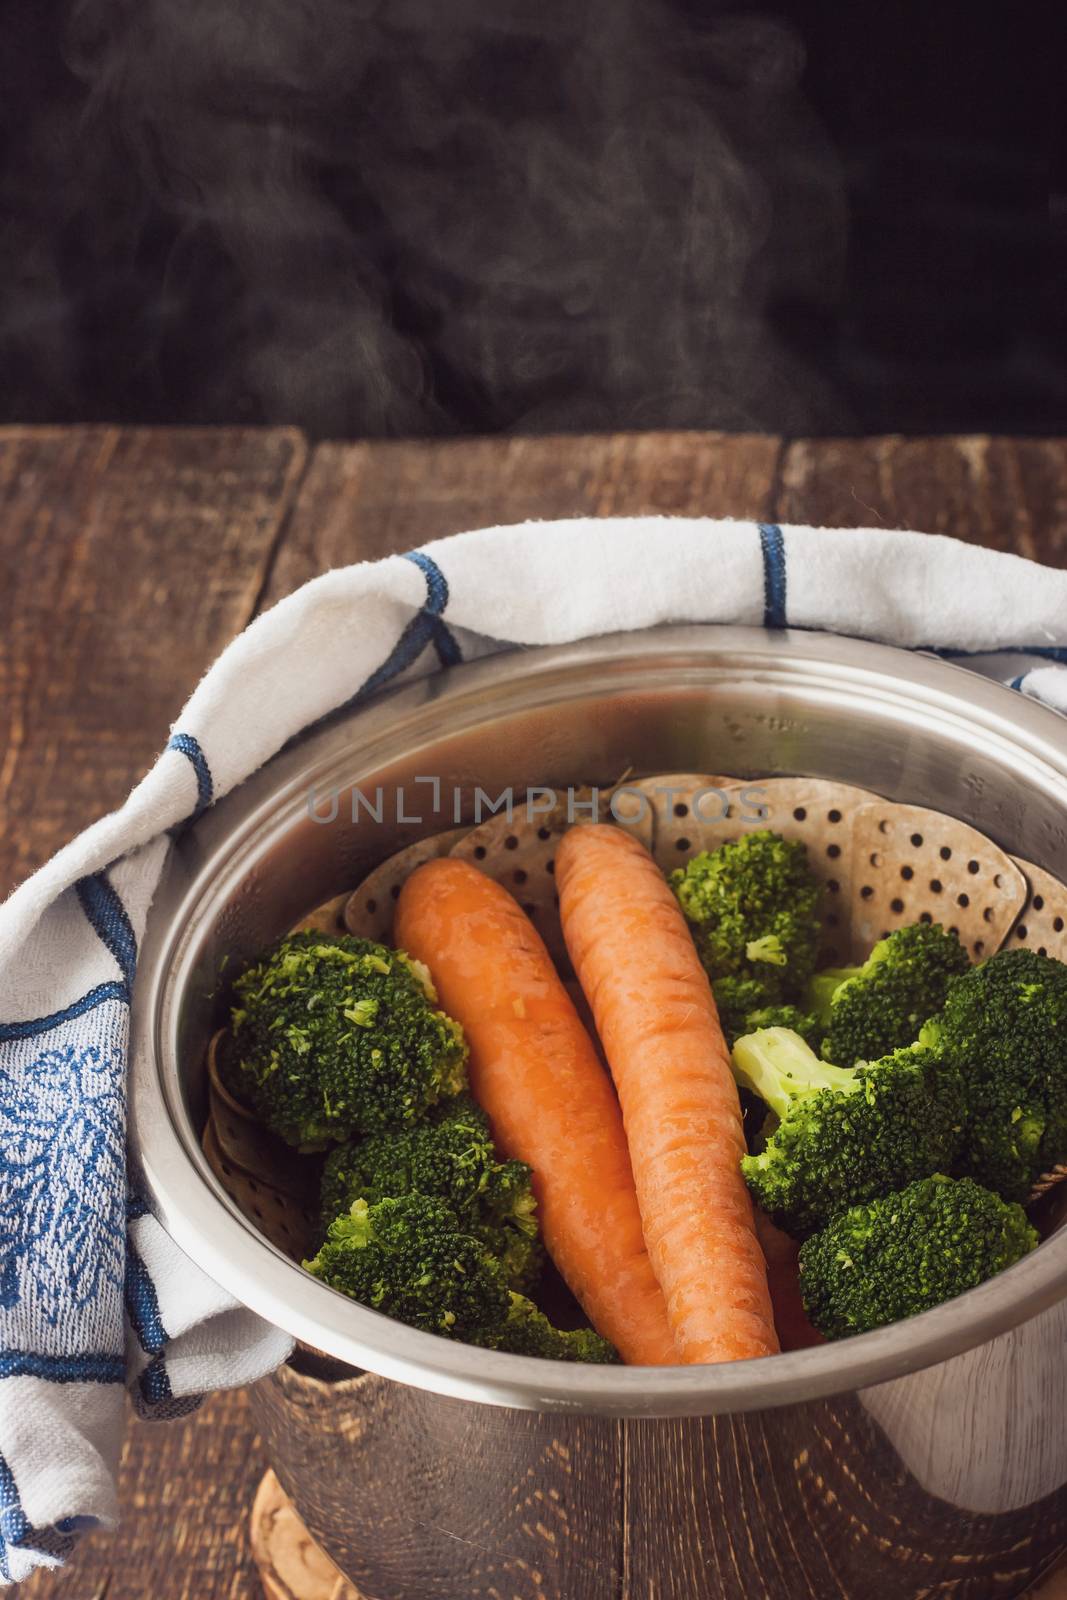 Steamed broccoli and carrots  in the pot with steam